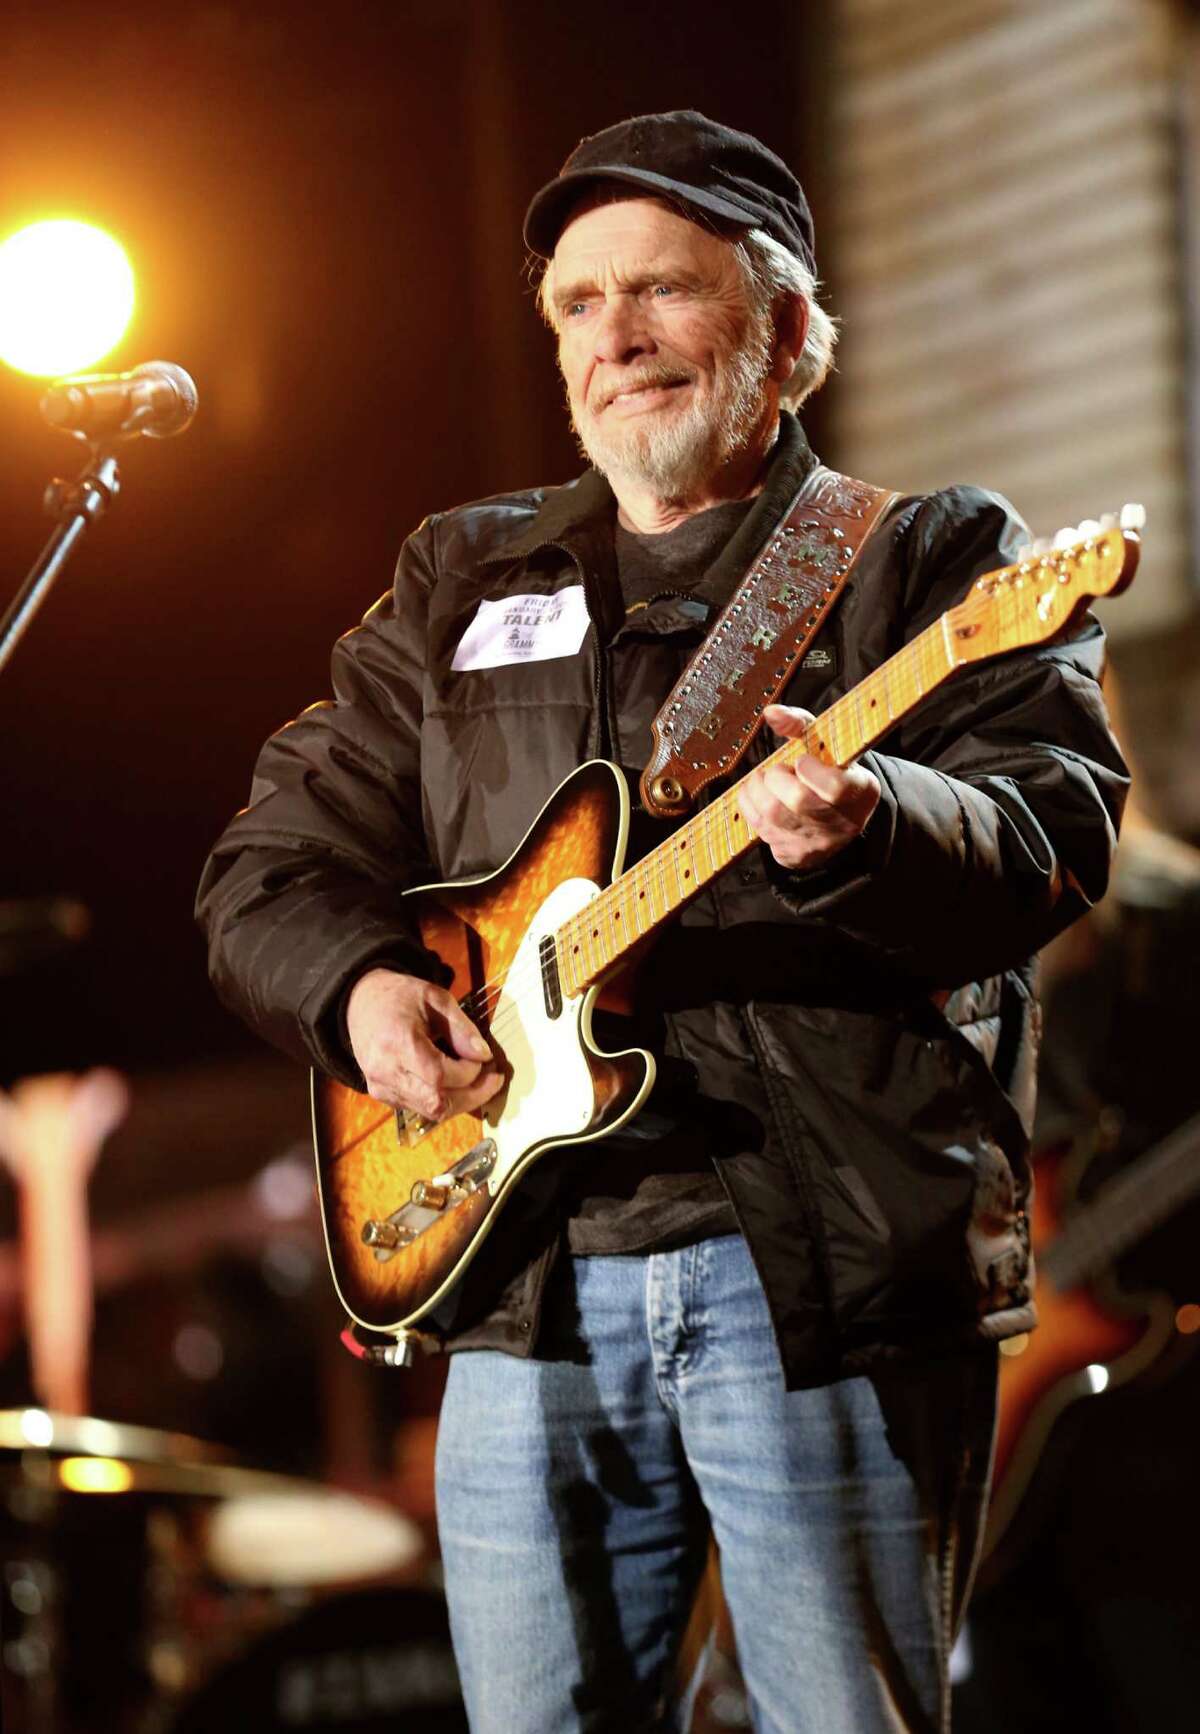 Apparently old-school country is alive and well. Willie Nelson and Merle Haggard (pictured), two of the oldest-school performers still going, have teamed up for a three-night stand at Whitewater Amphitheatre at Canyon Lake. All three shows are sold out, and have been for some time. Take that, Nashville country rockers.Doors at 6:30 Thursday, 7 p.n. Friday-Saturday, Whitewater Amphitheatre, FM 306 at the Guadalupe River, Sattler. Whitewaterrocks.com.-- Robert Johnson